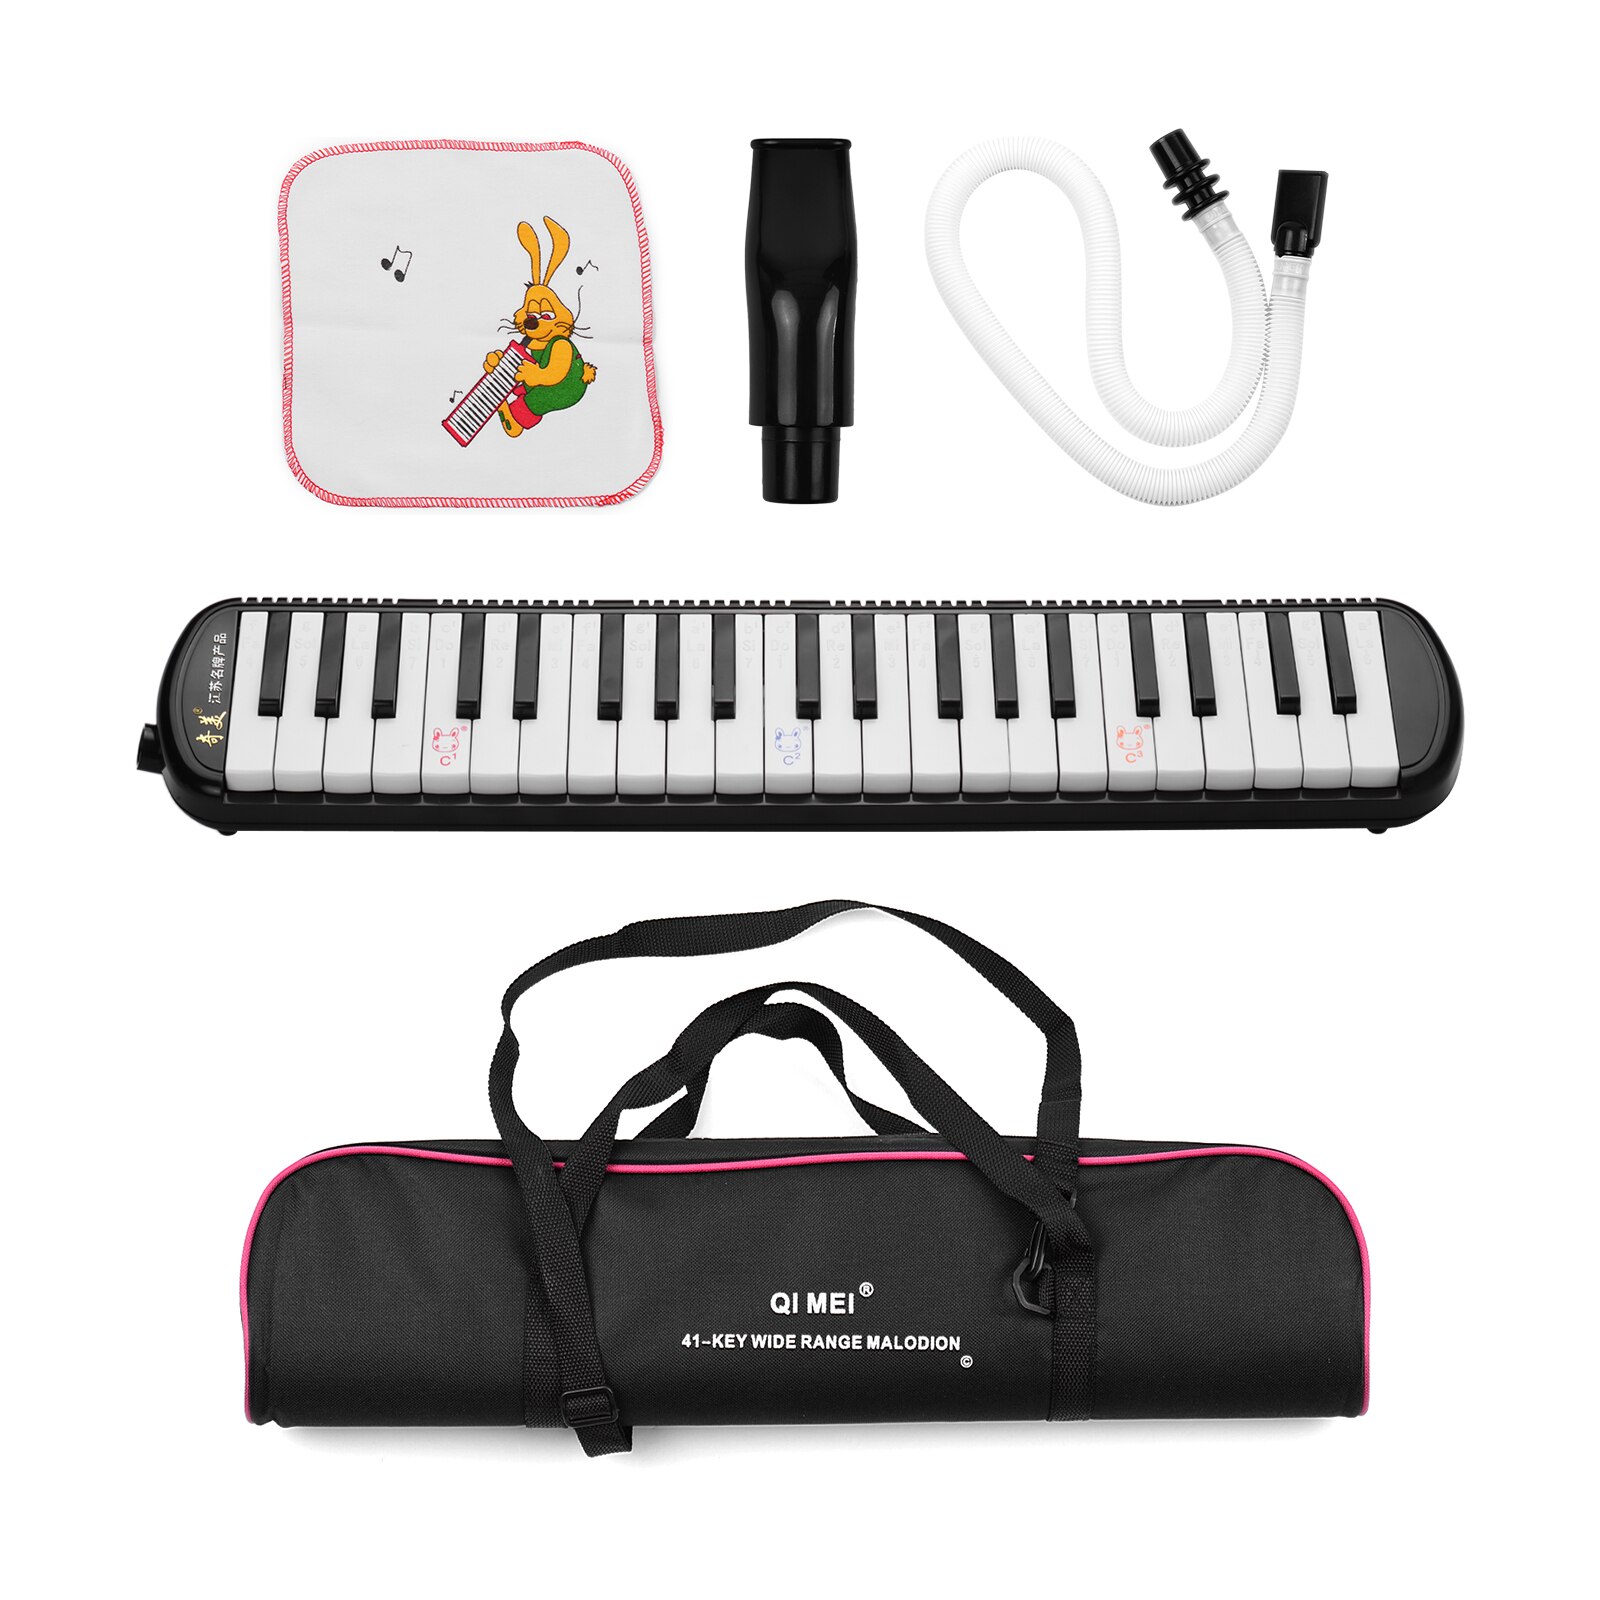 41 Keys Melodica Pianica Mouth Piano Air Piano Keyboard Musical Instrument for Music Education Accompaniment Kids Beginners